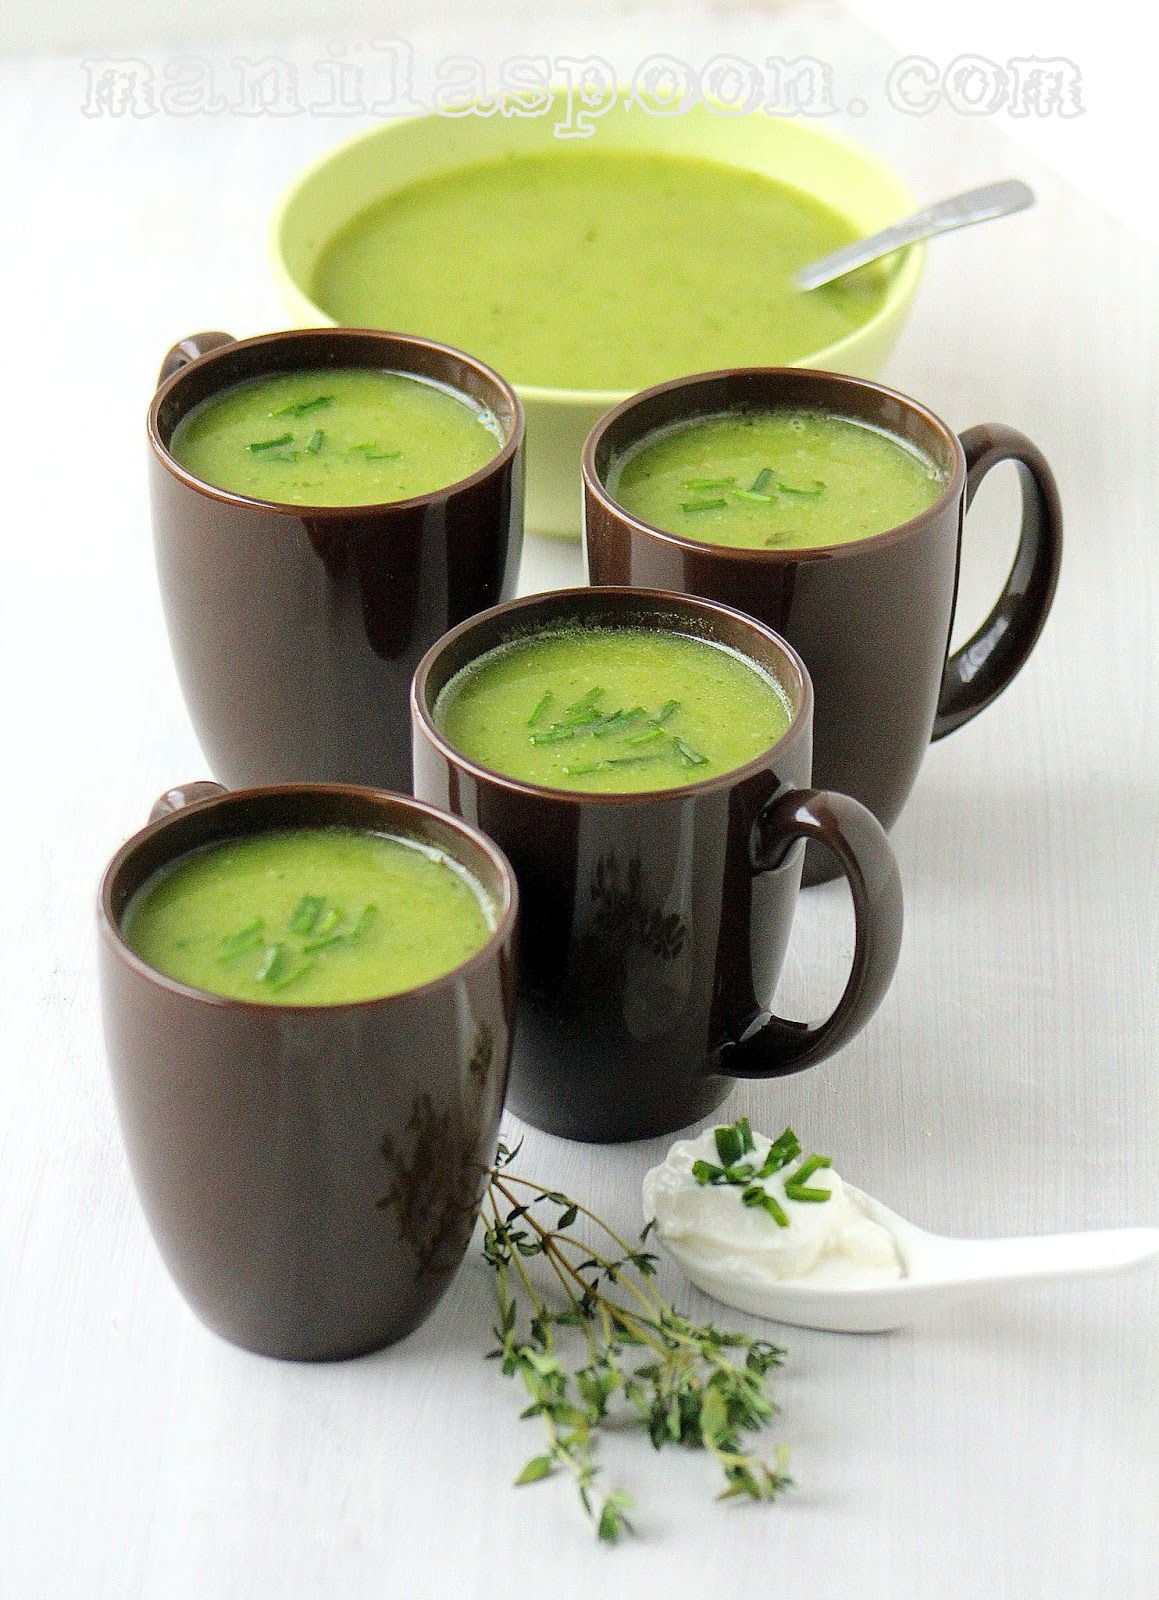 Easy to make, tasty and healthy soup for the remaining days of winter and to welcome Spring - ZUCCHINI SOUP. Gluten-free and low-carb, too! | manilaspoon.com